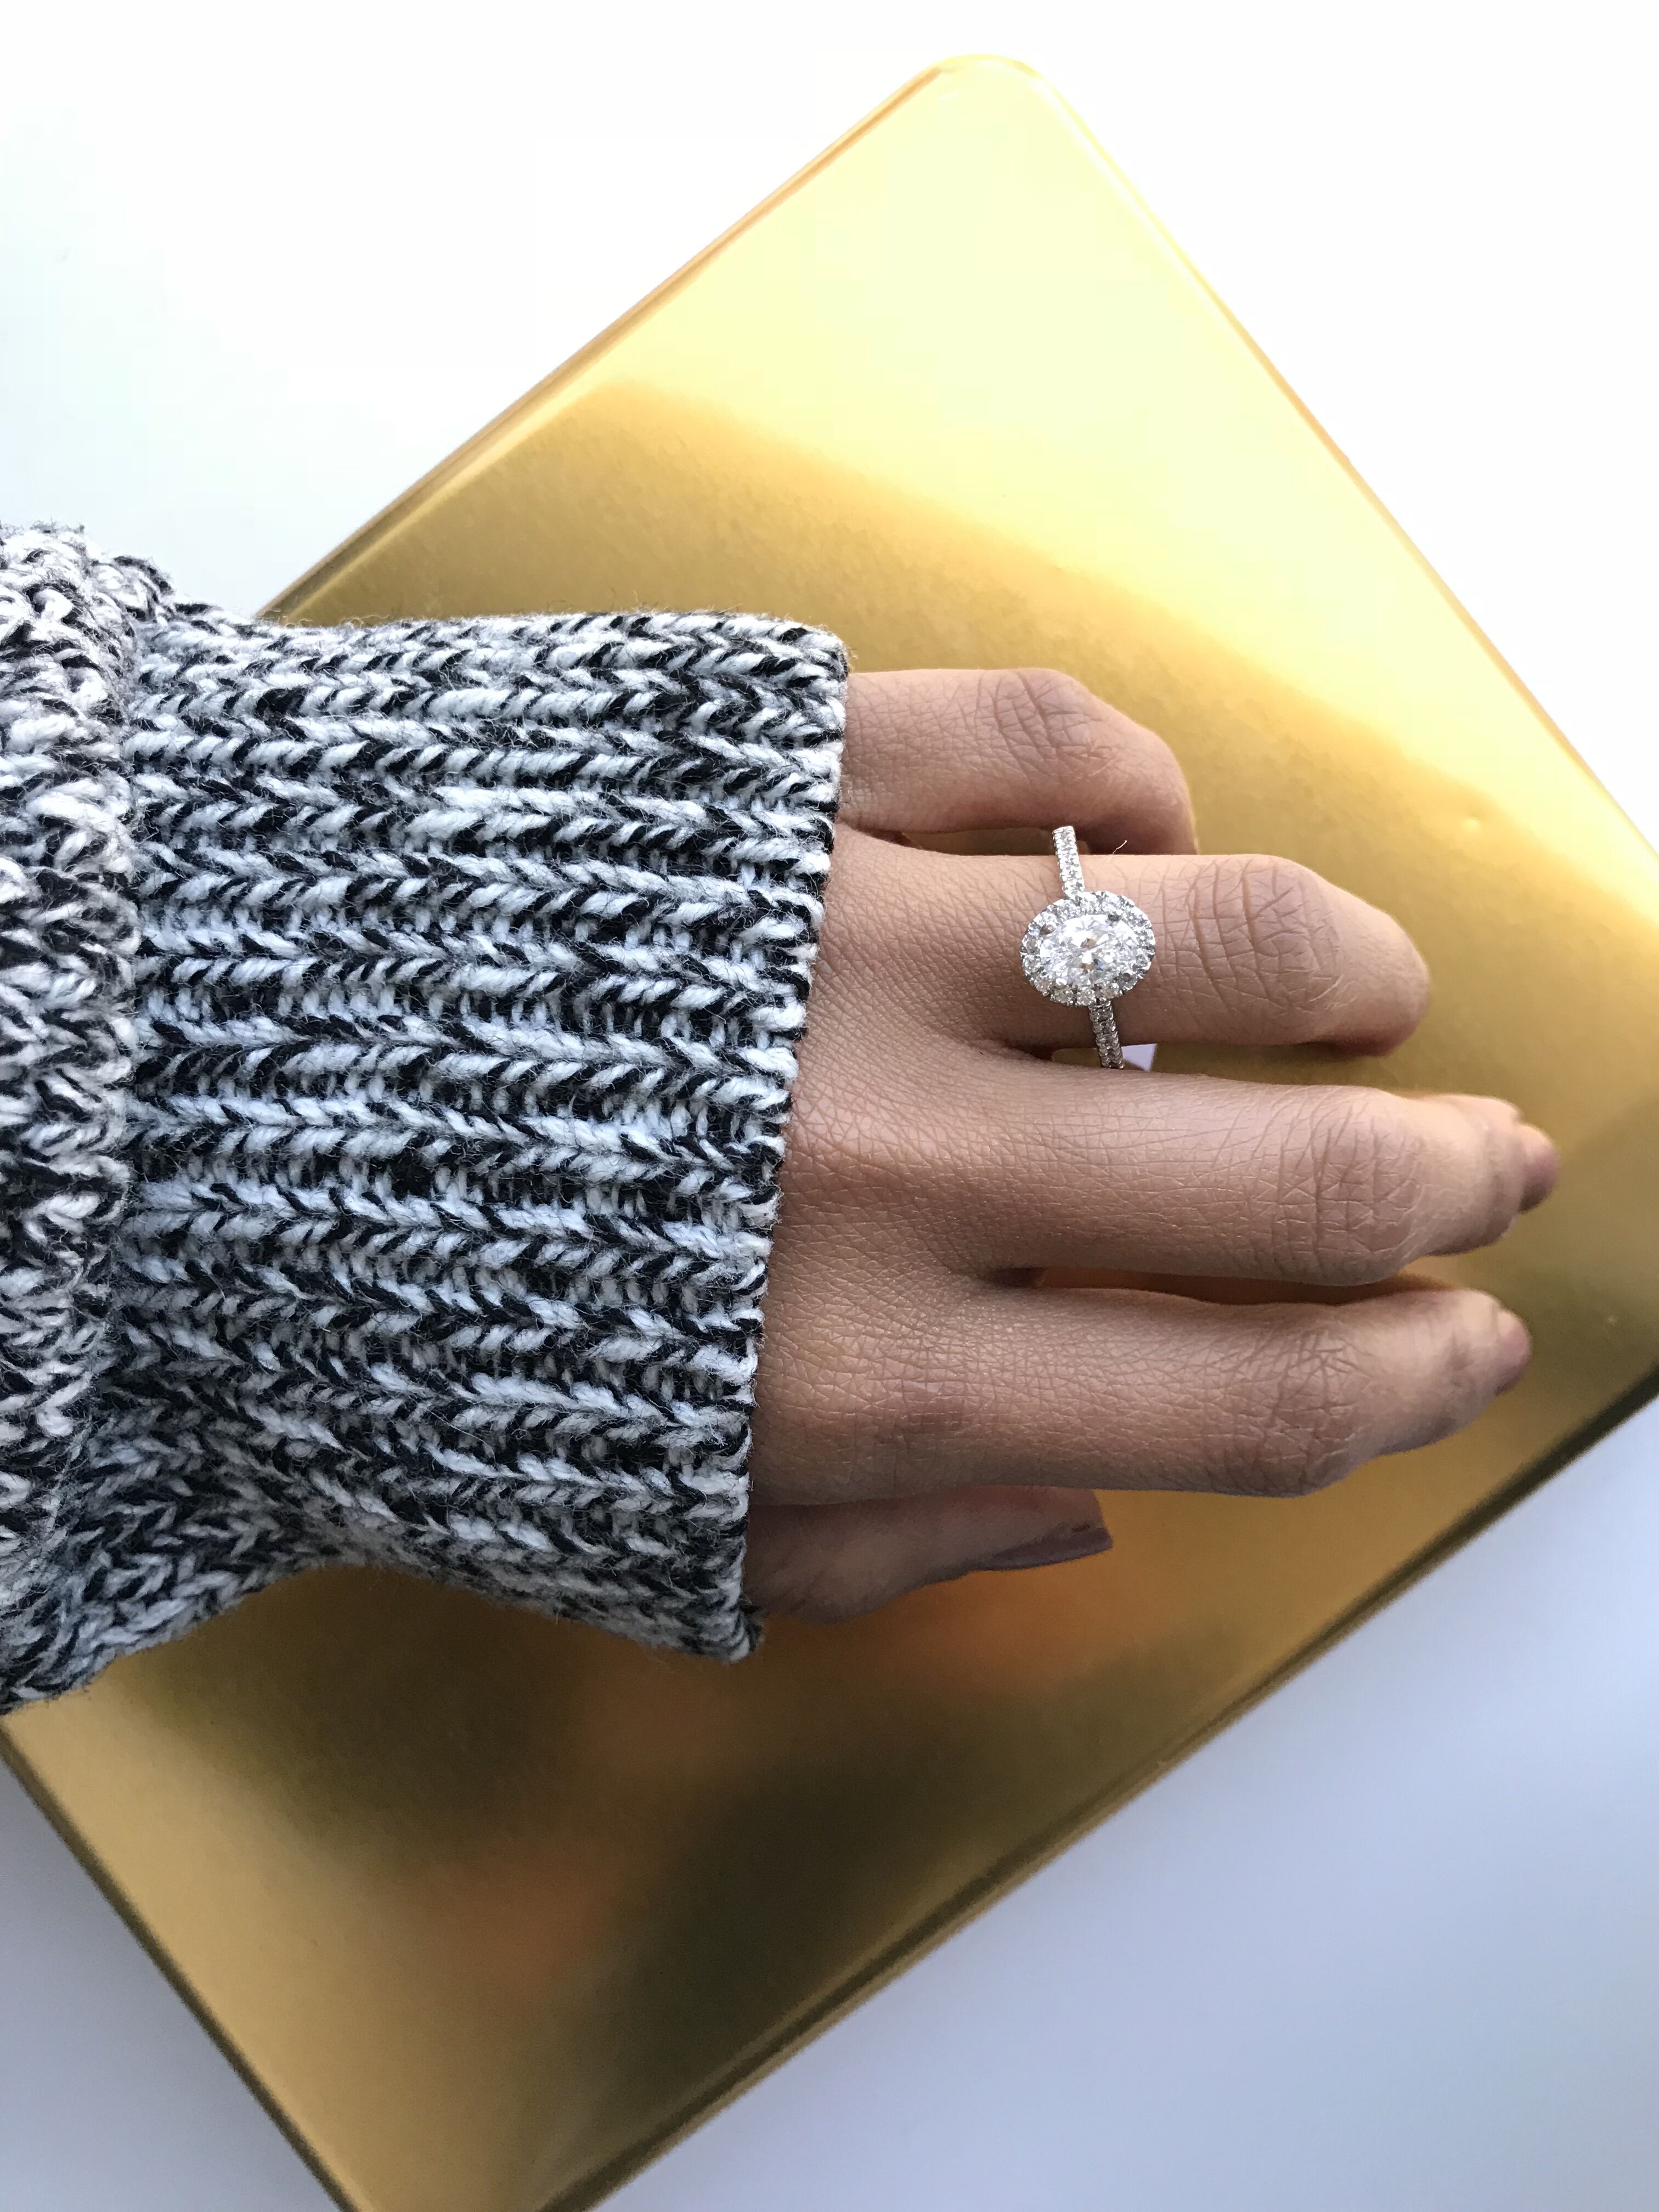 Engagement Ring Finger: The Meaning Behind - Diamond wish